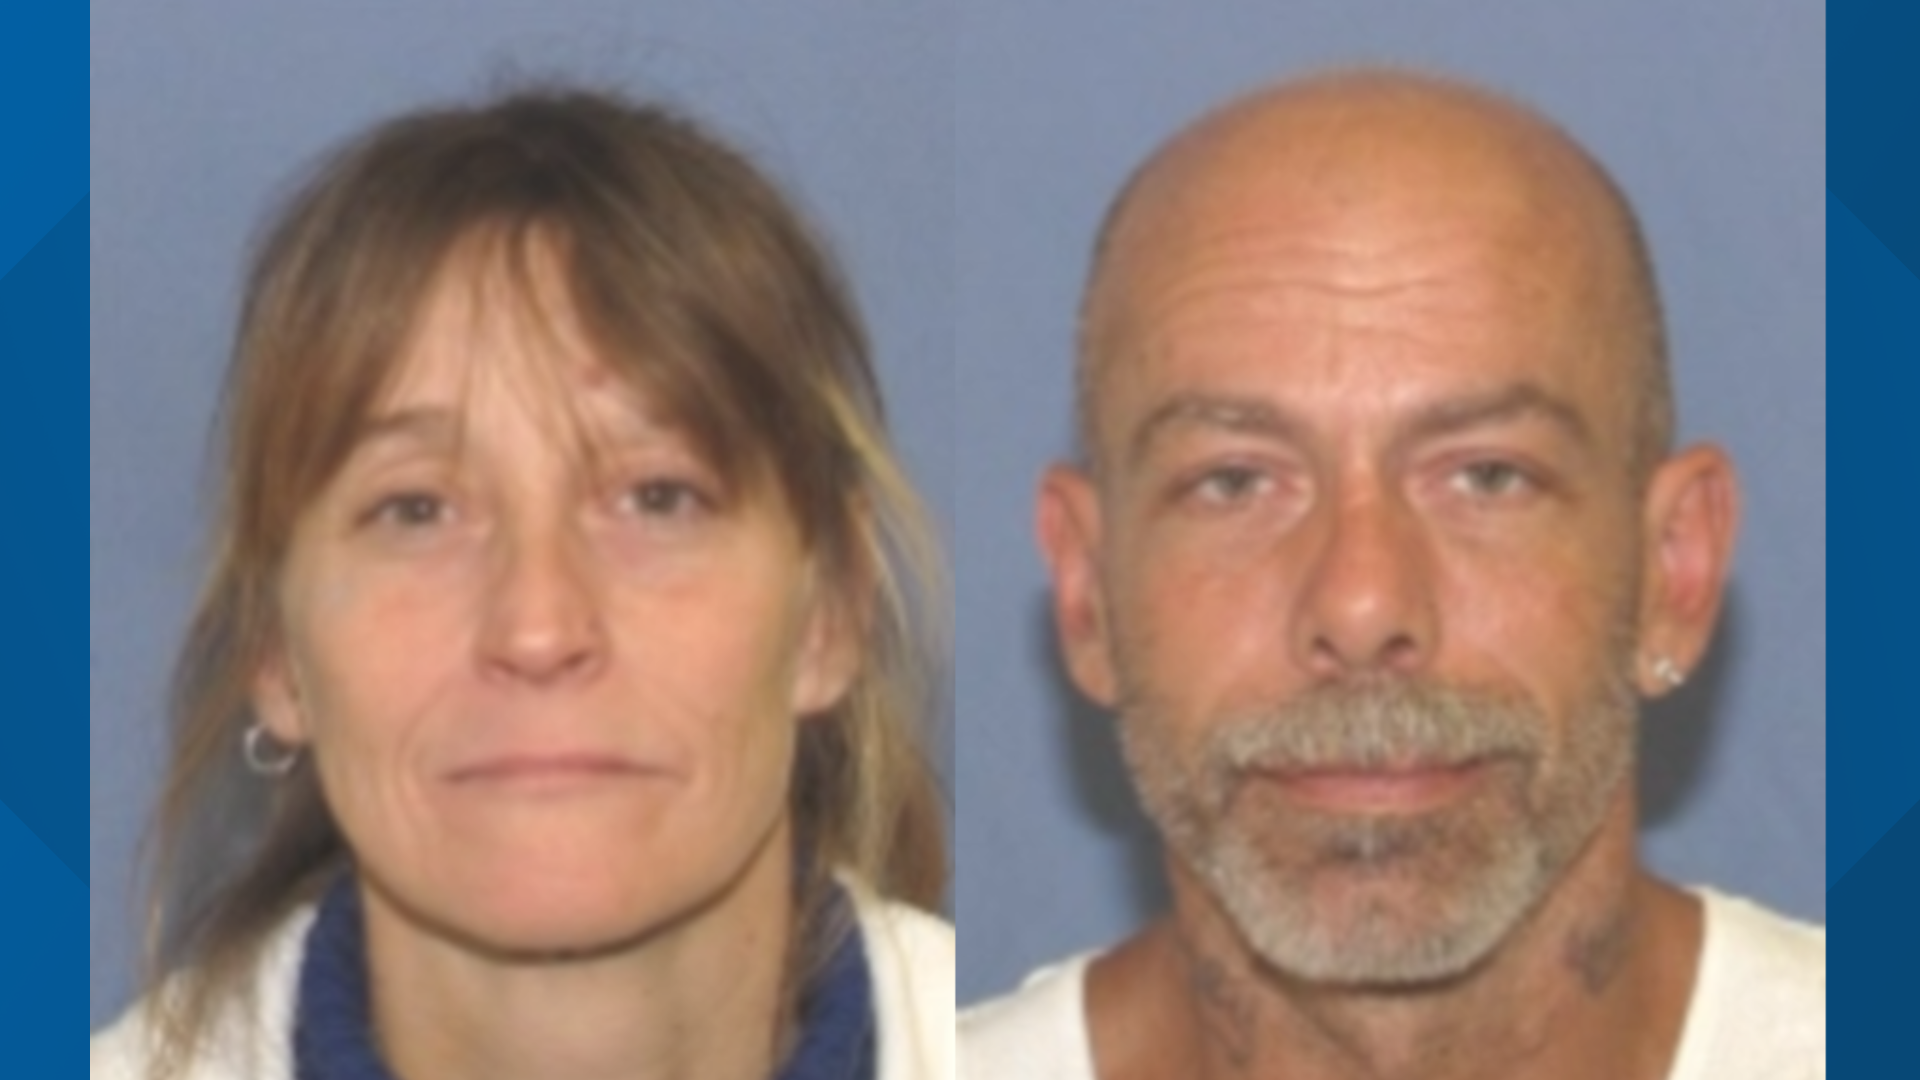 On January 14, the bodies were found during the execution of a search warrant at a resident in the 2400 block of Sullivant Avenue in west Columbus.